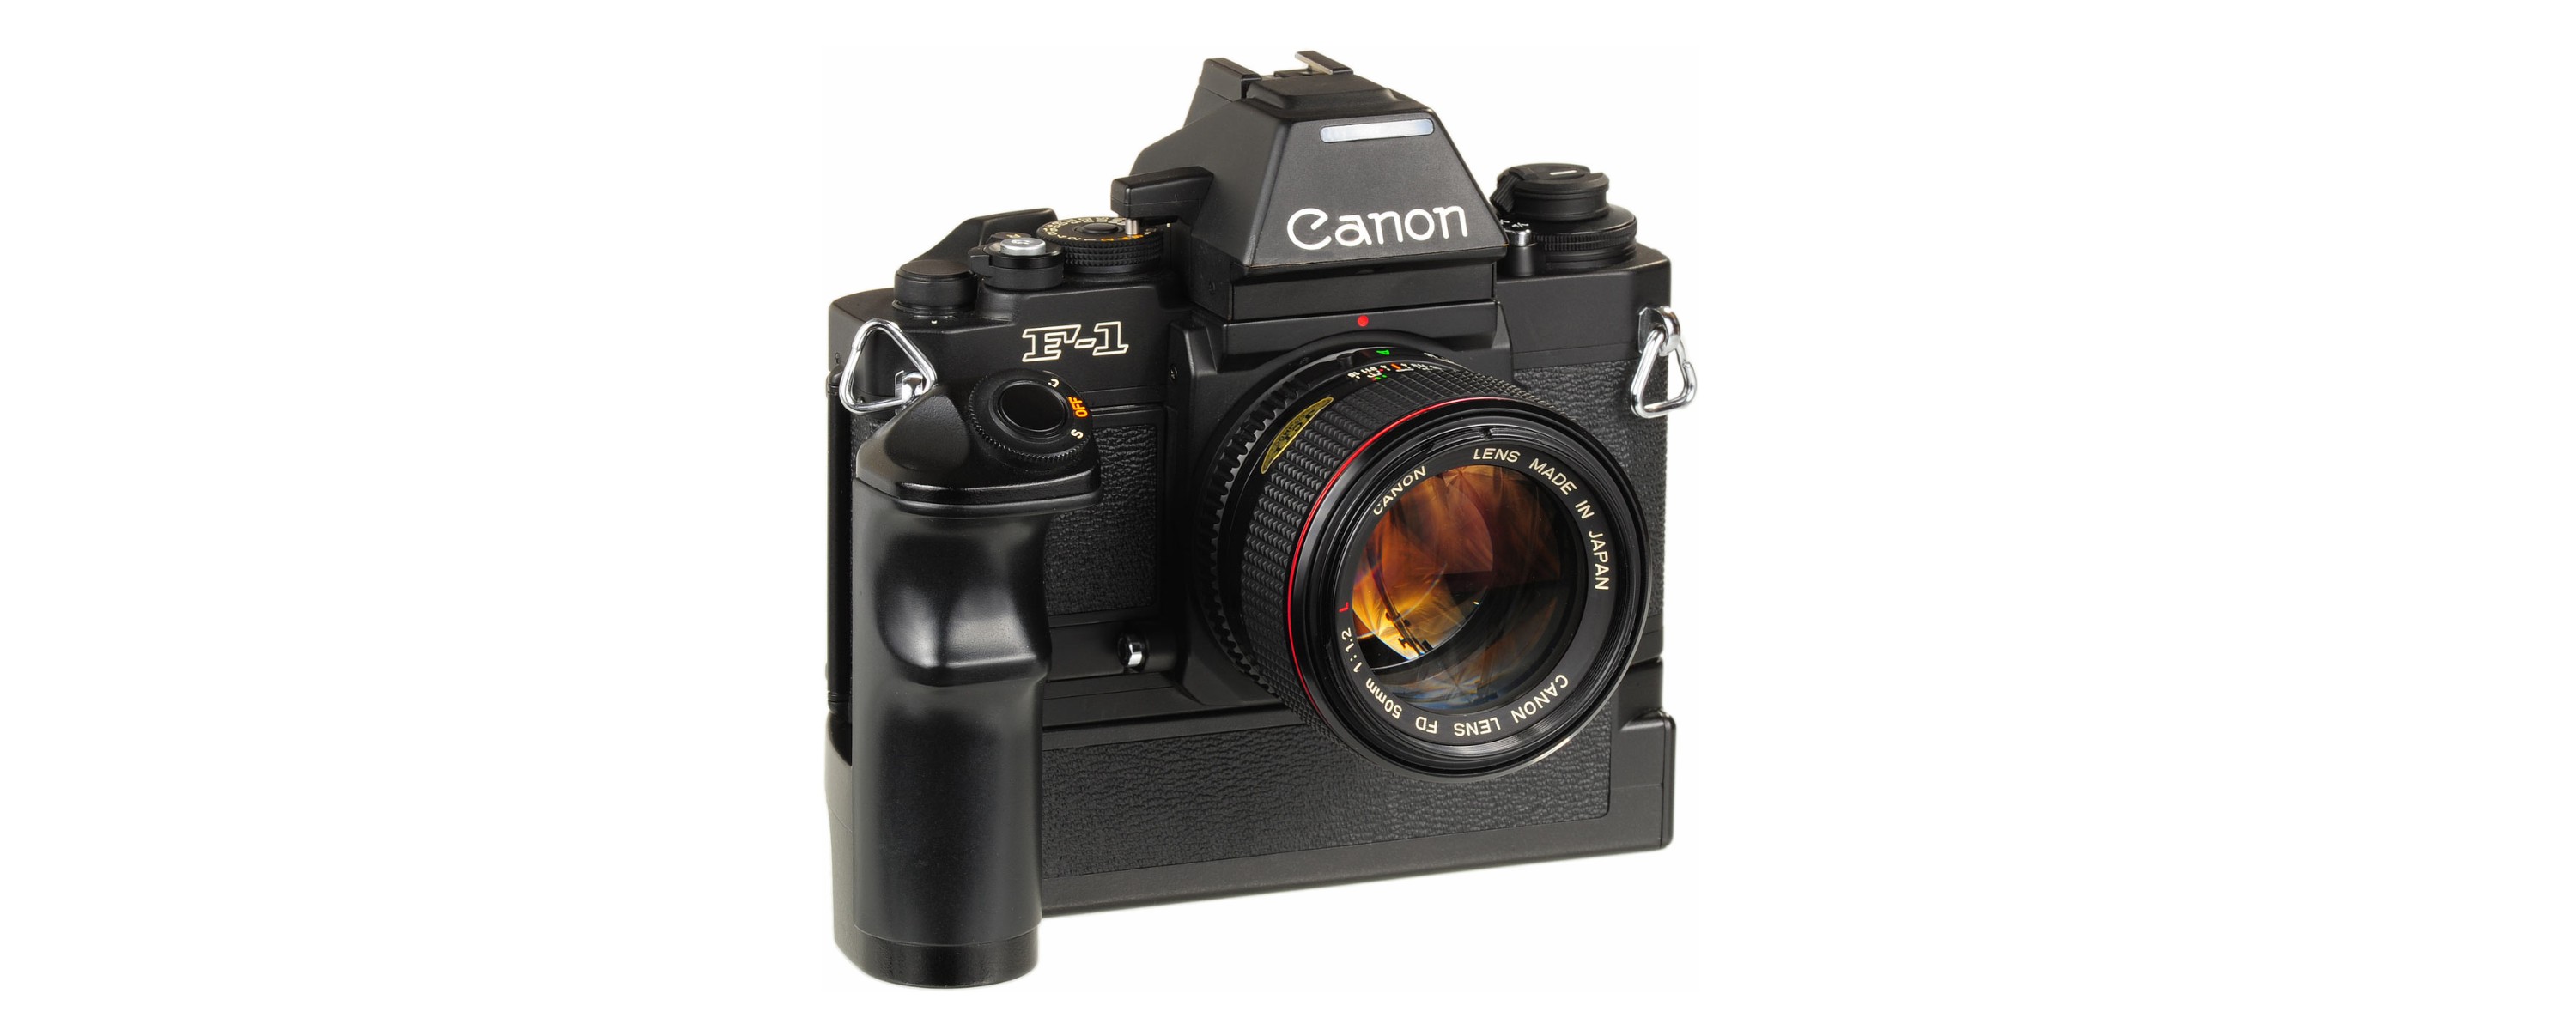 Canon F1 – Another One Bites The Dust